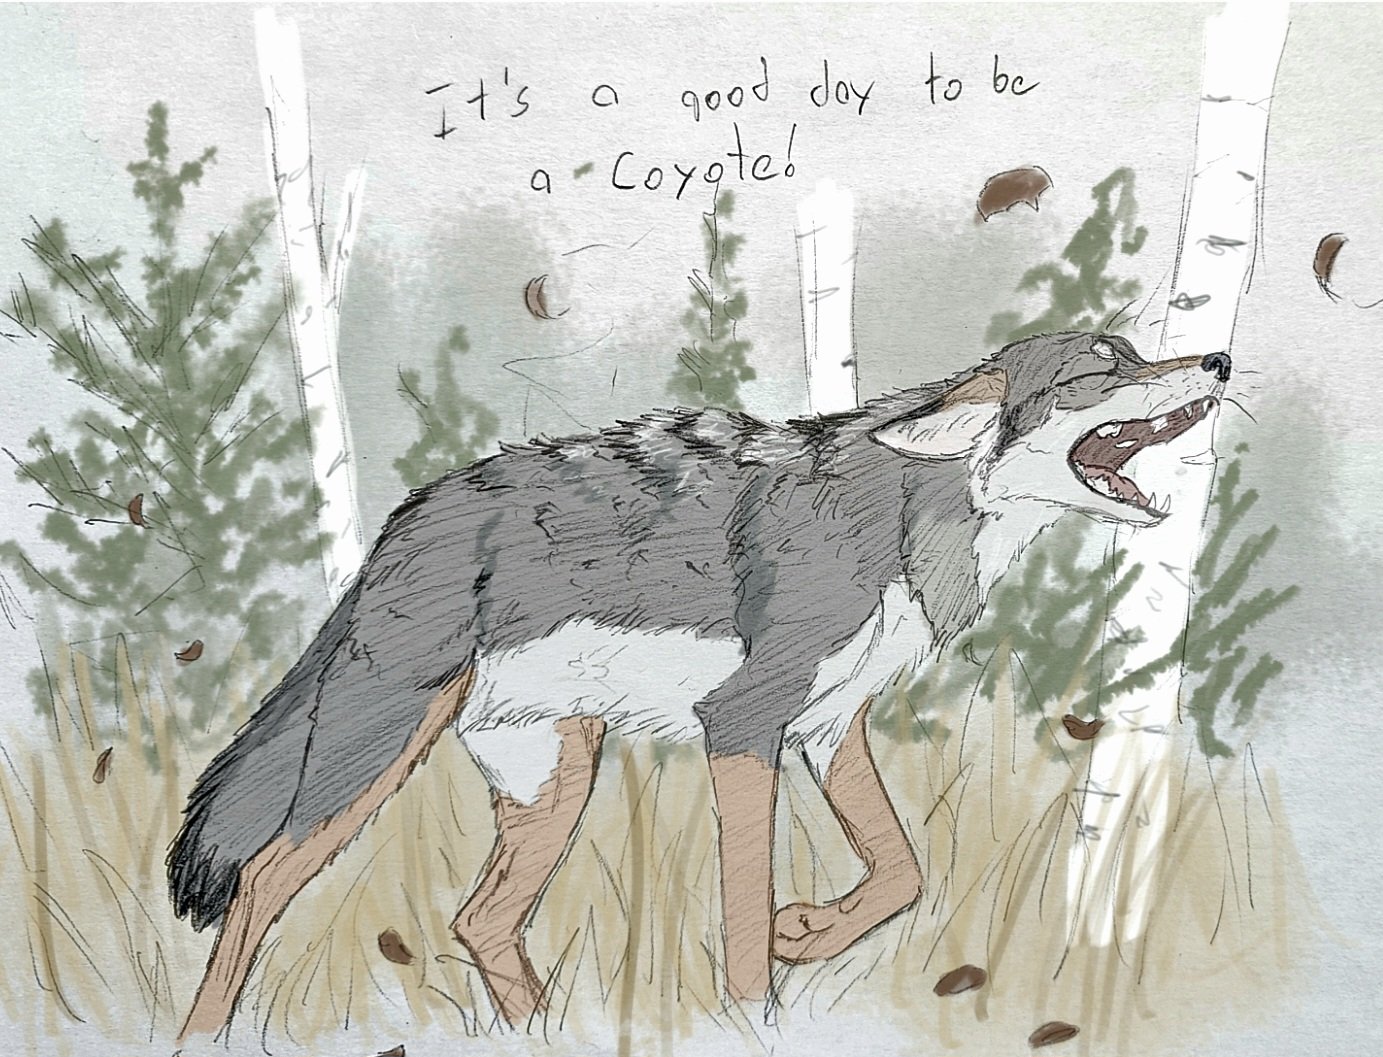 coyote & wolf therian songs 